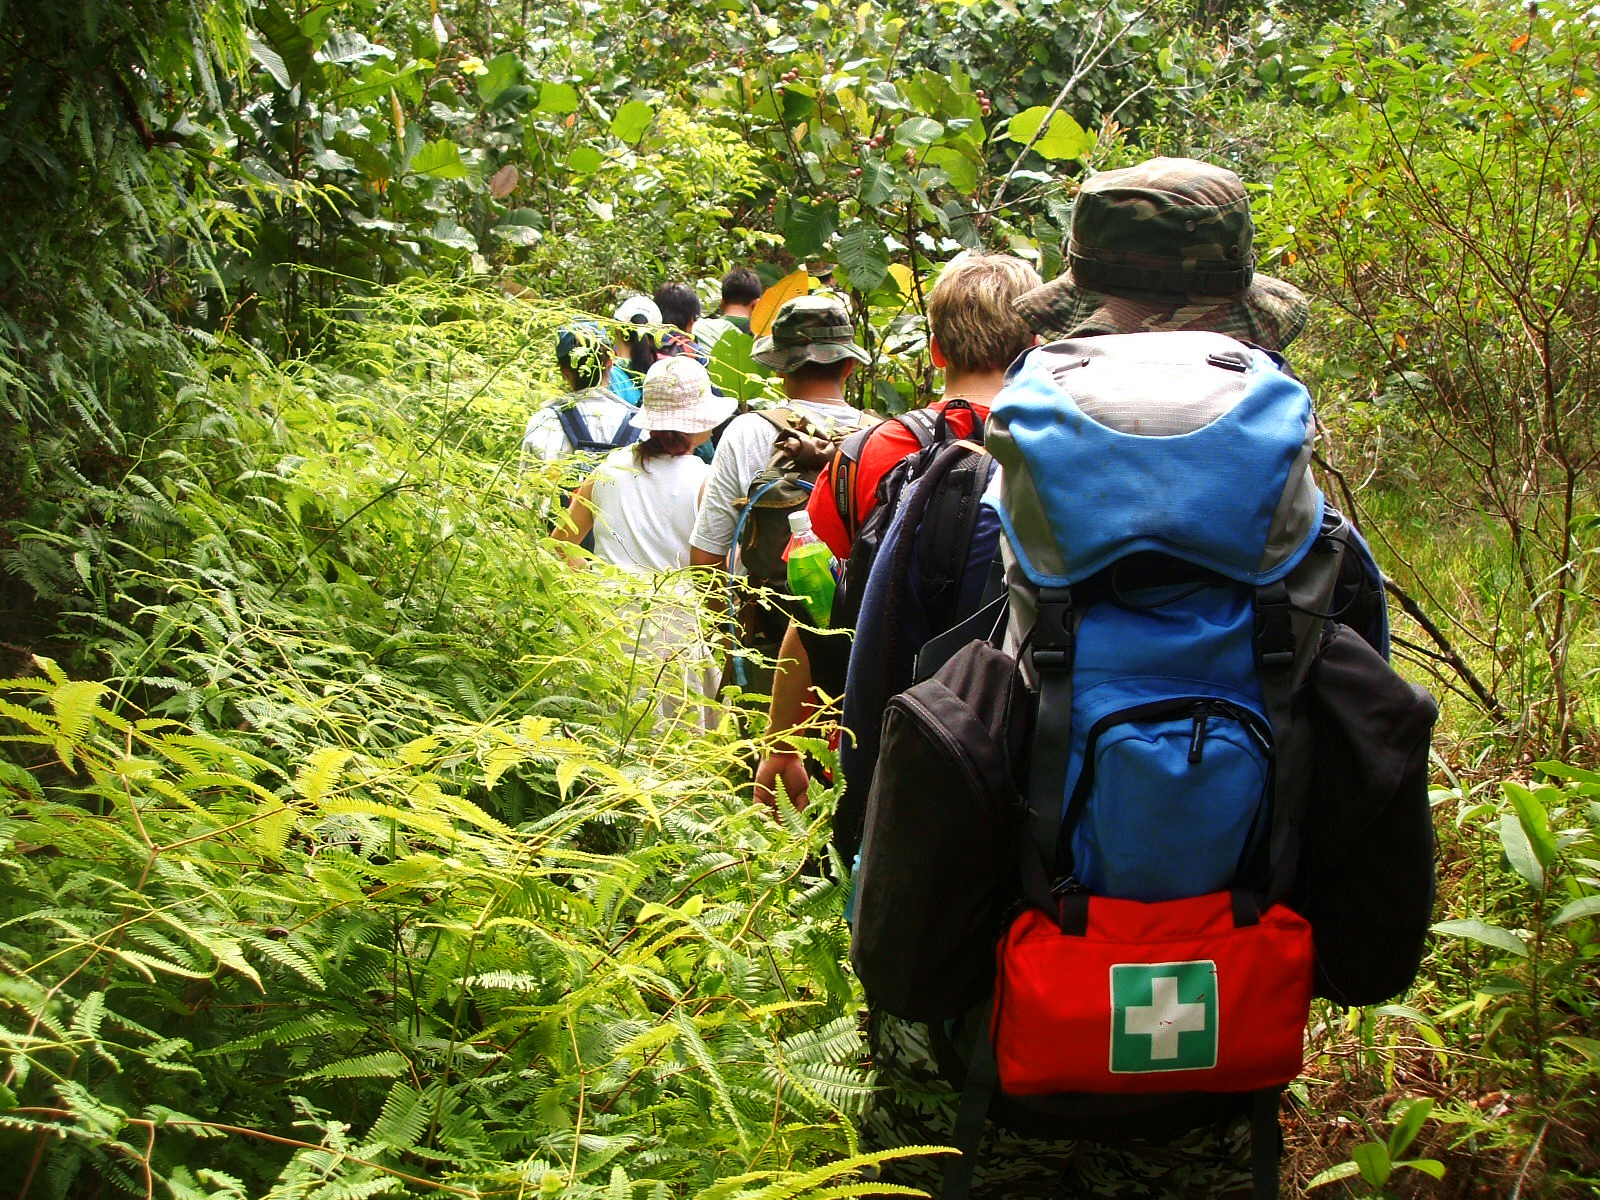 Group Hiking with Back Packs and an Emergency Aid Kit